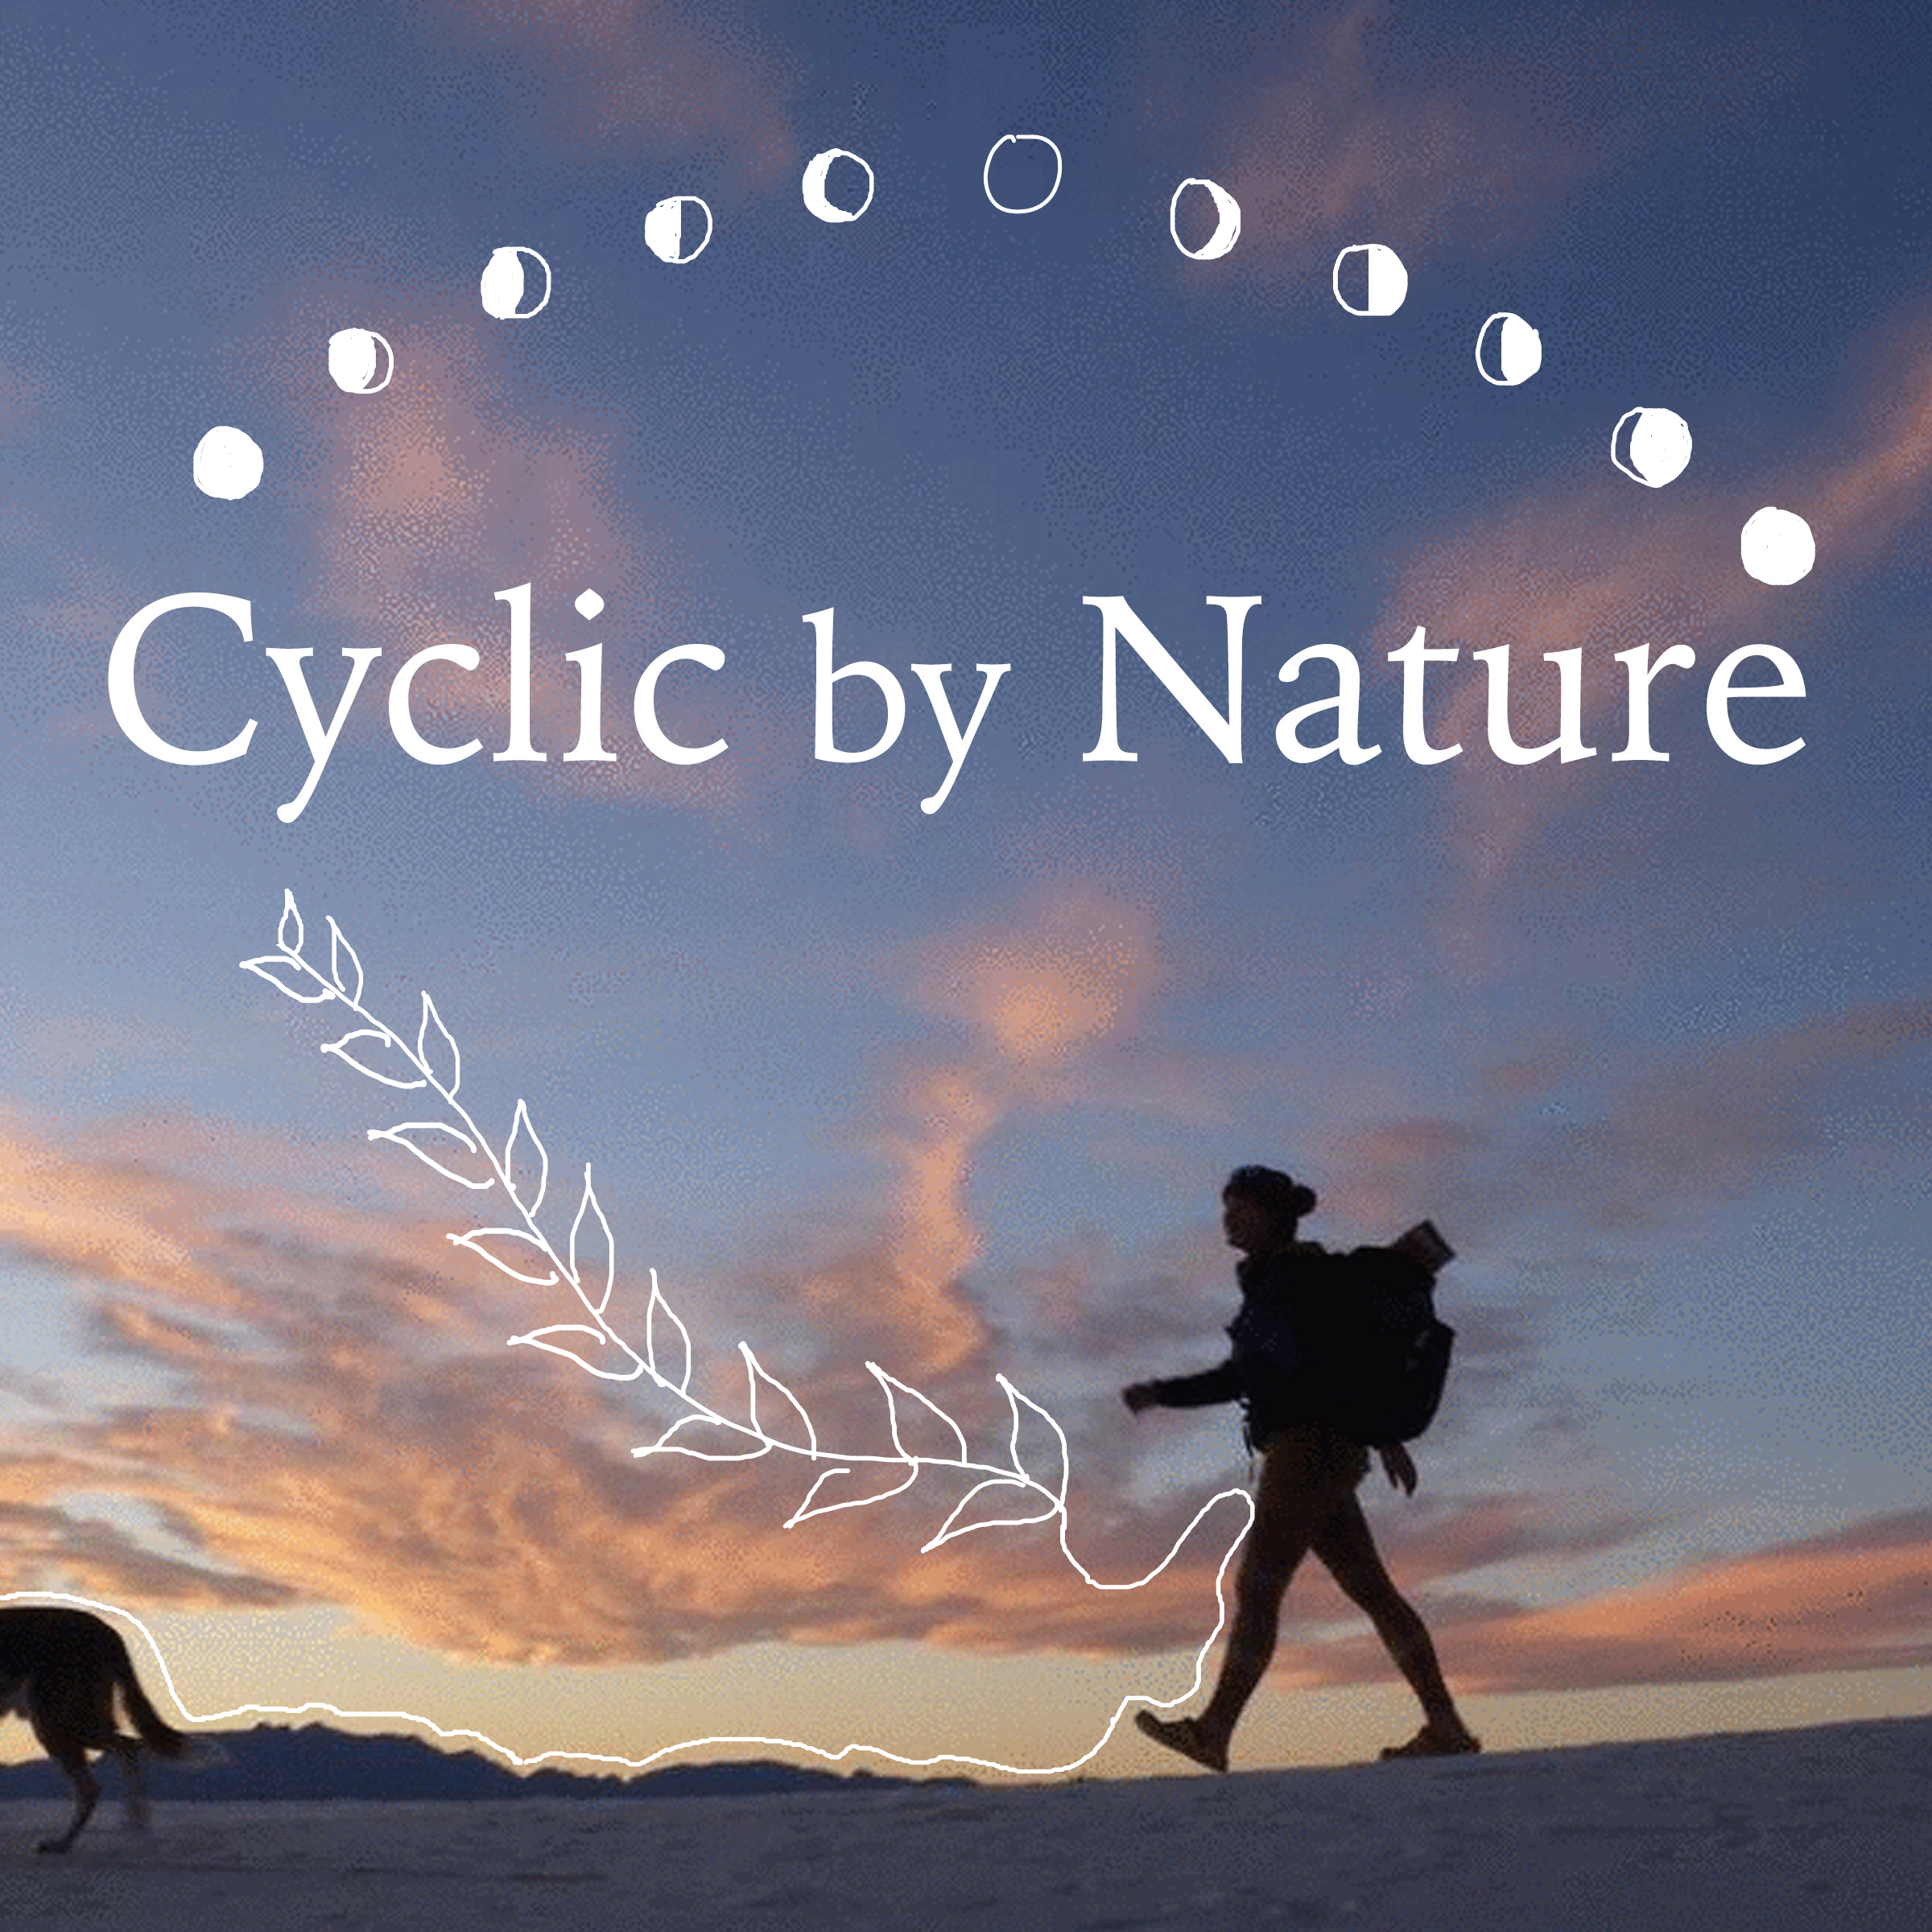 Cyclic by Nature